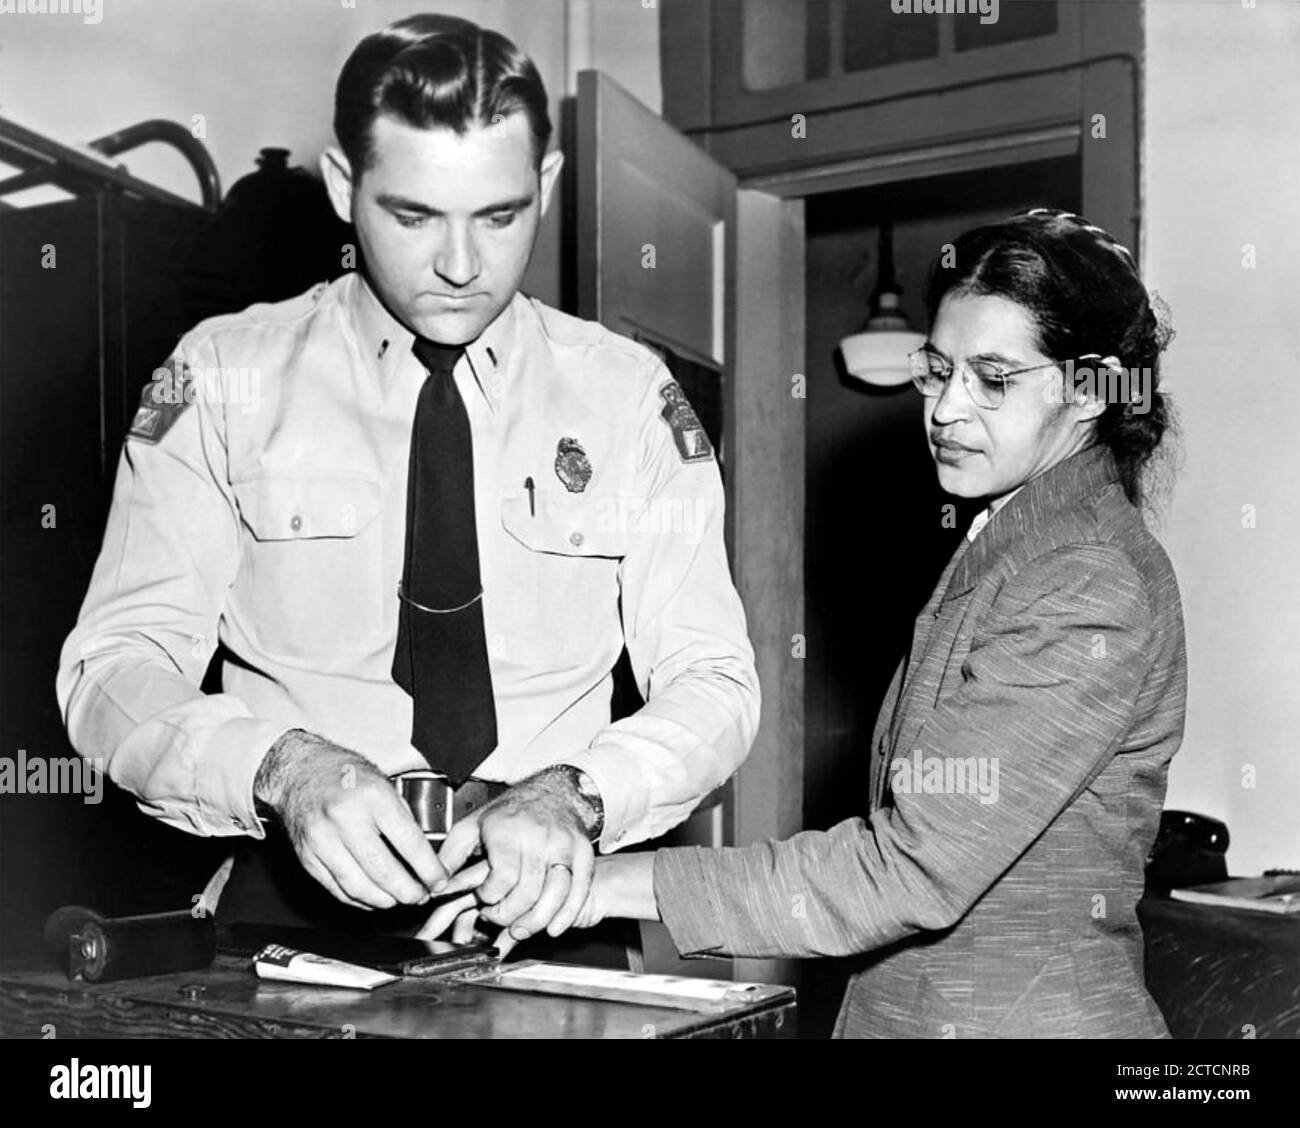 ROSA PARKS (1913-2005) American civil rights activist is fingerprinted by Lieutenant D.H. Lackey on 22 February 1956 after a Grand Jury indicted 113 African Americans for organising a bus boycott in Montgomery, Alabama. Photo: Alamaba Dept or Archives and History. Stock Photo